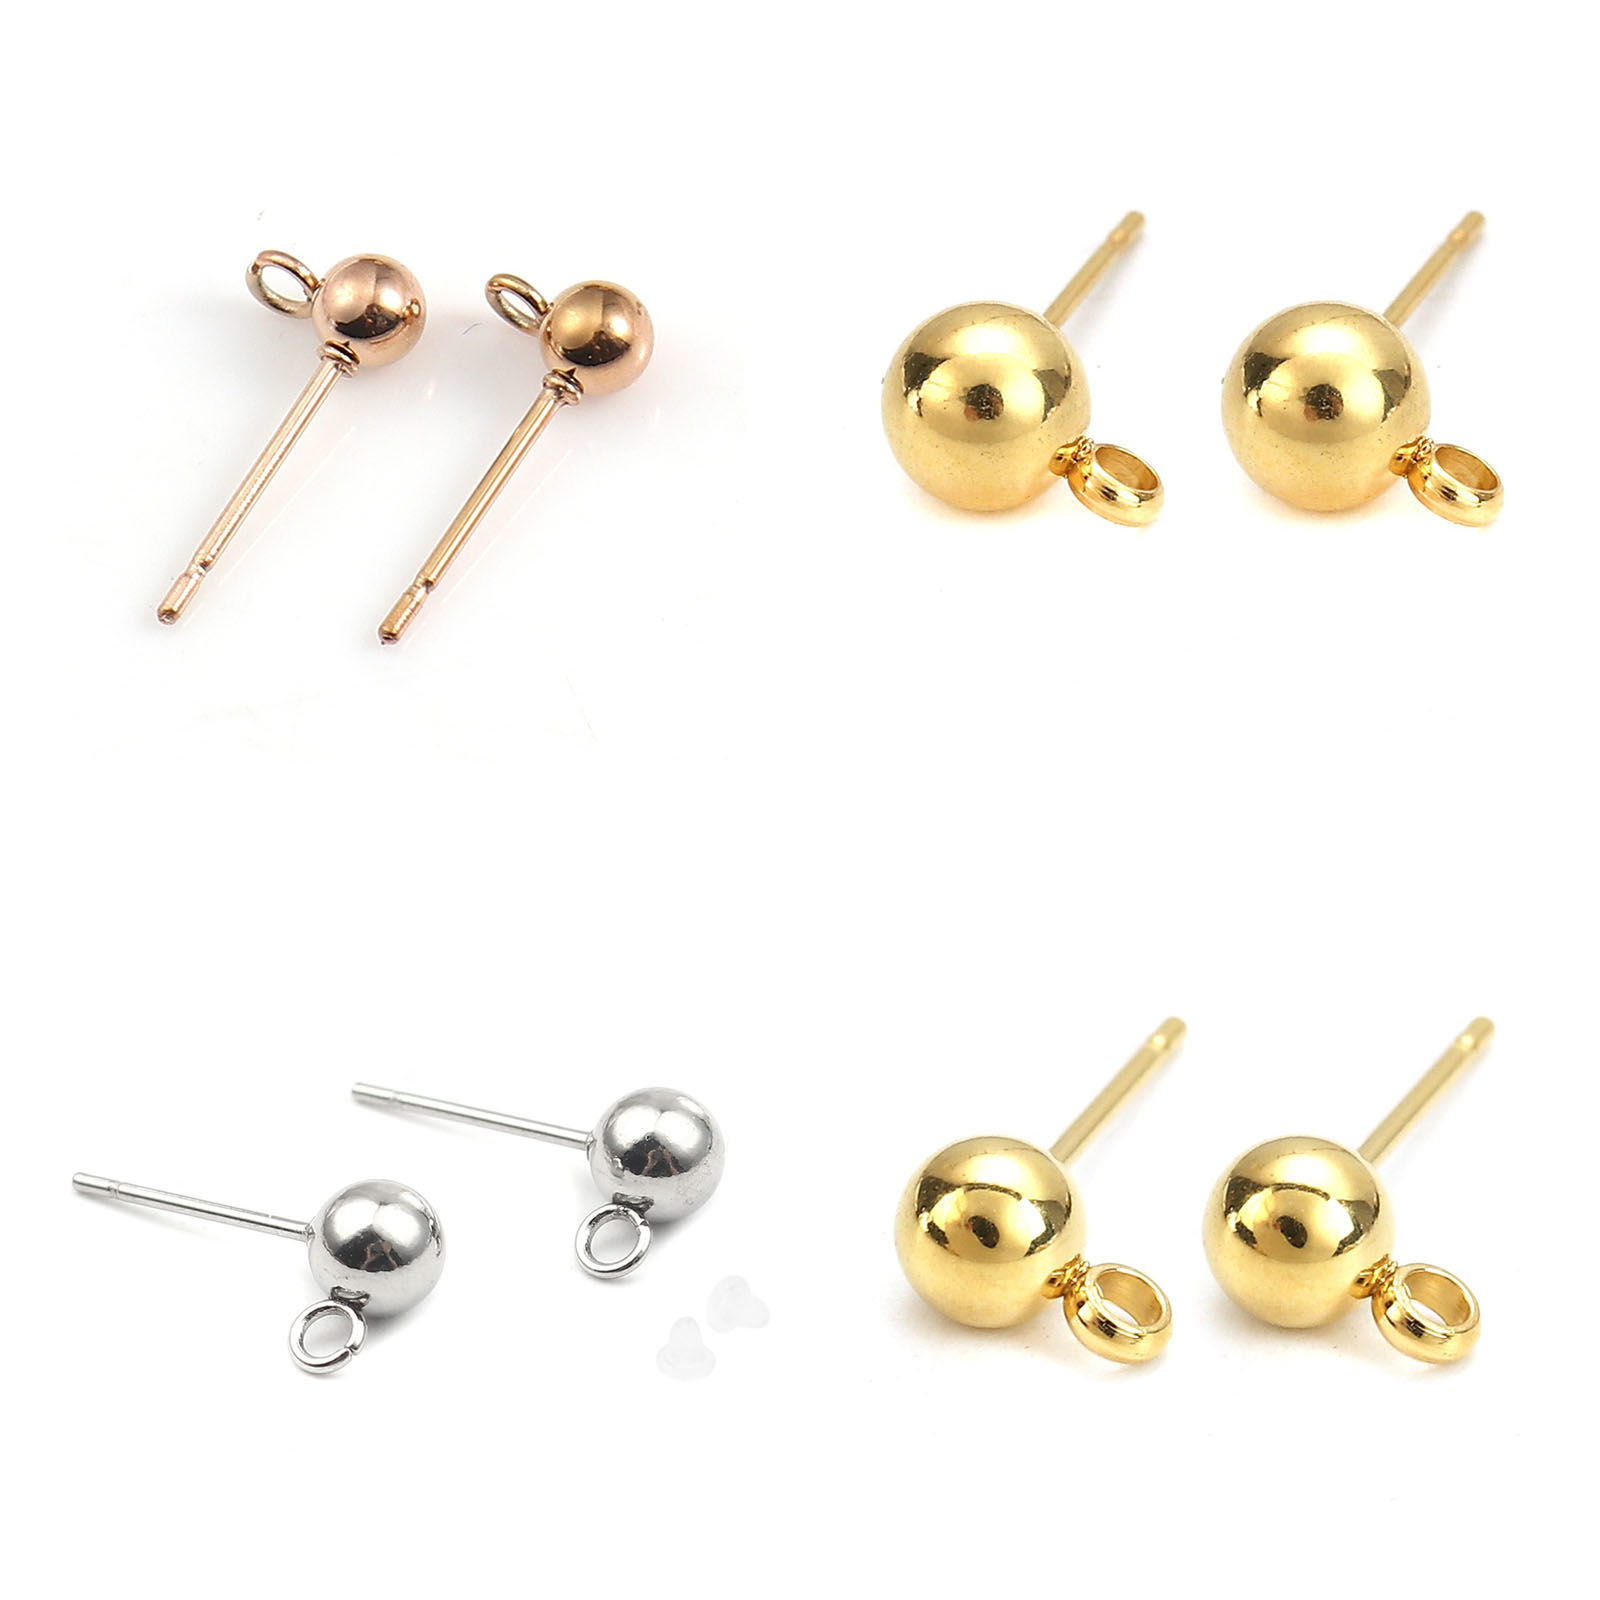 Picture of 304 Stainless Steel Ear Post Stud Earrings Ball Gold Plated W/ Loop 9mm( 3/8") x 6mm( 2/8"), Post/ Wire Size: (21 gauge), 6 PCs